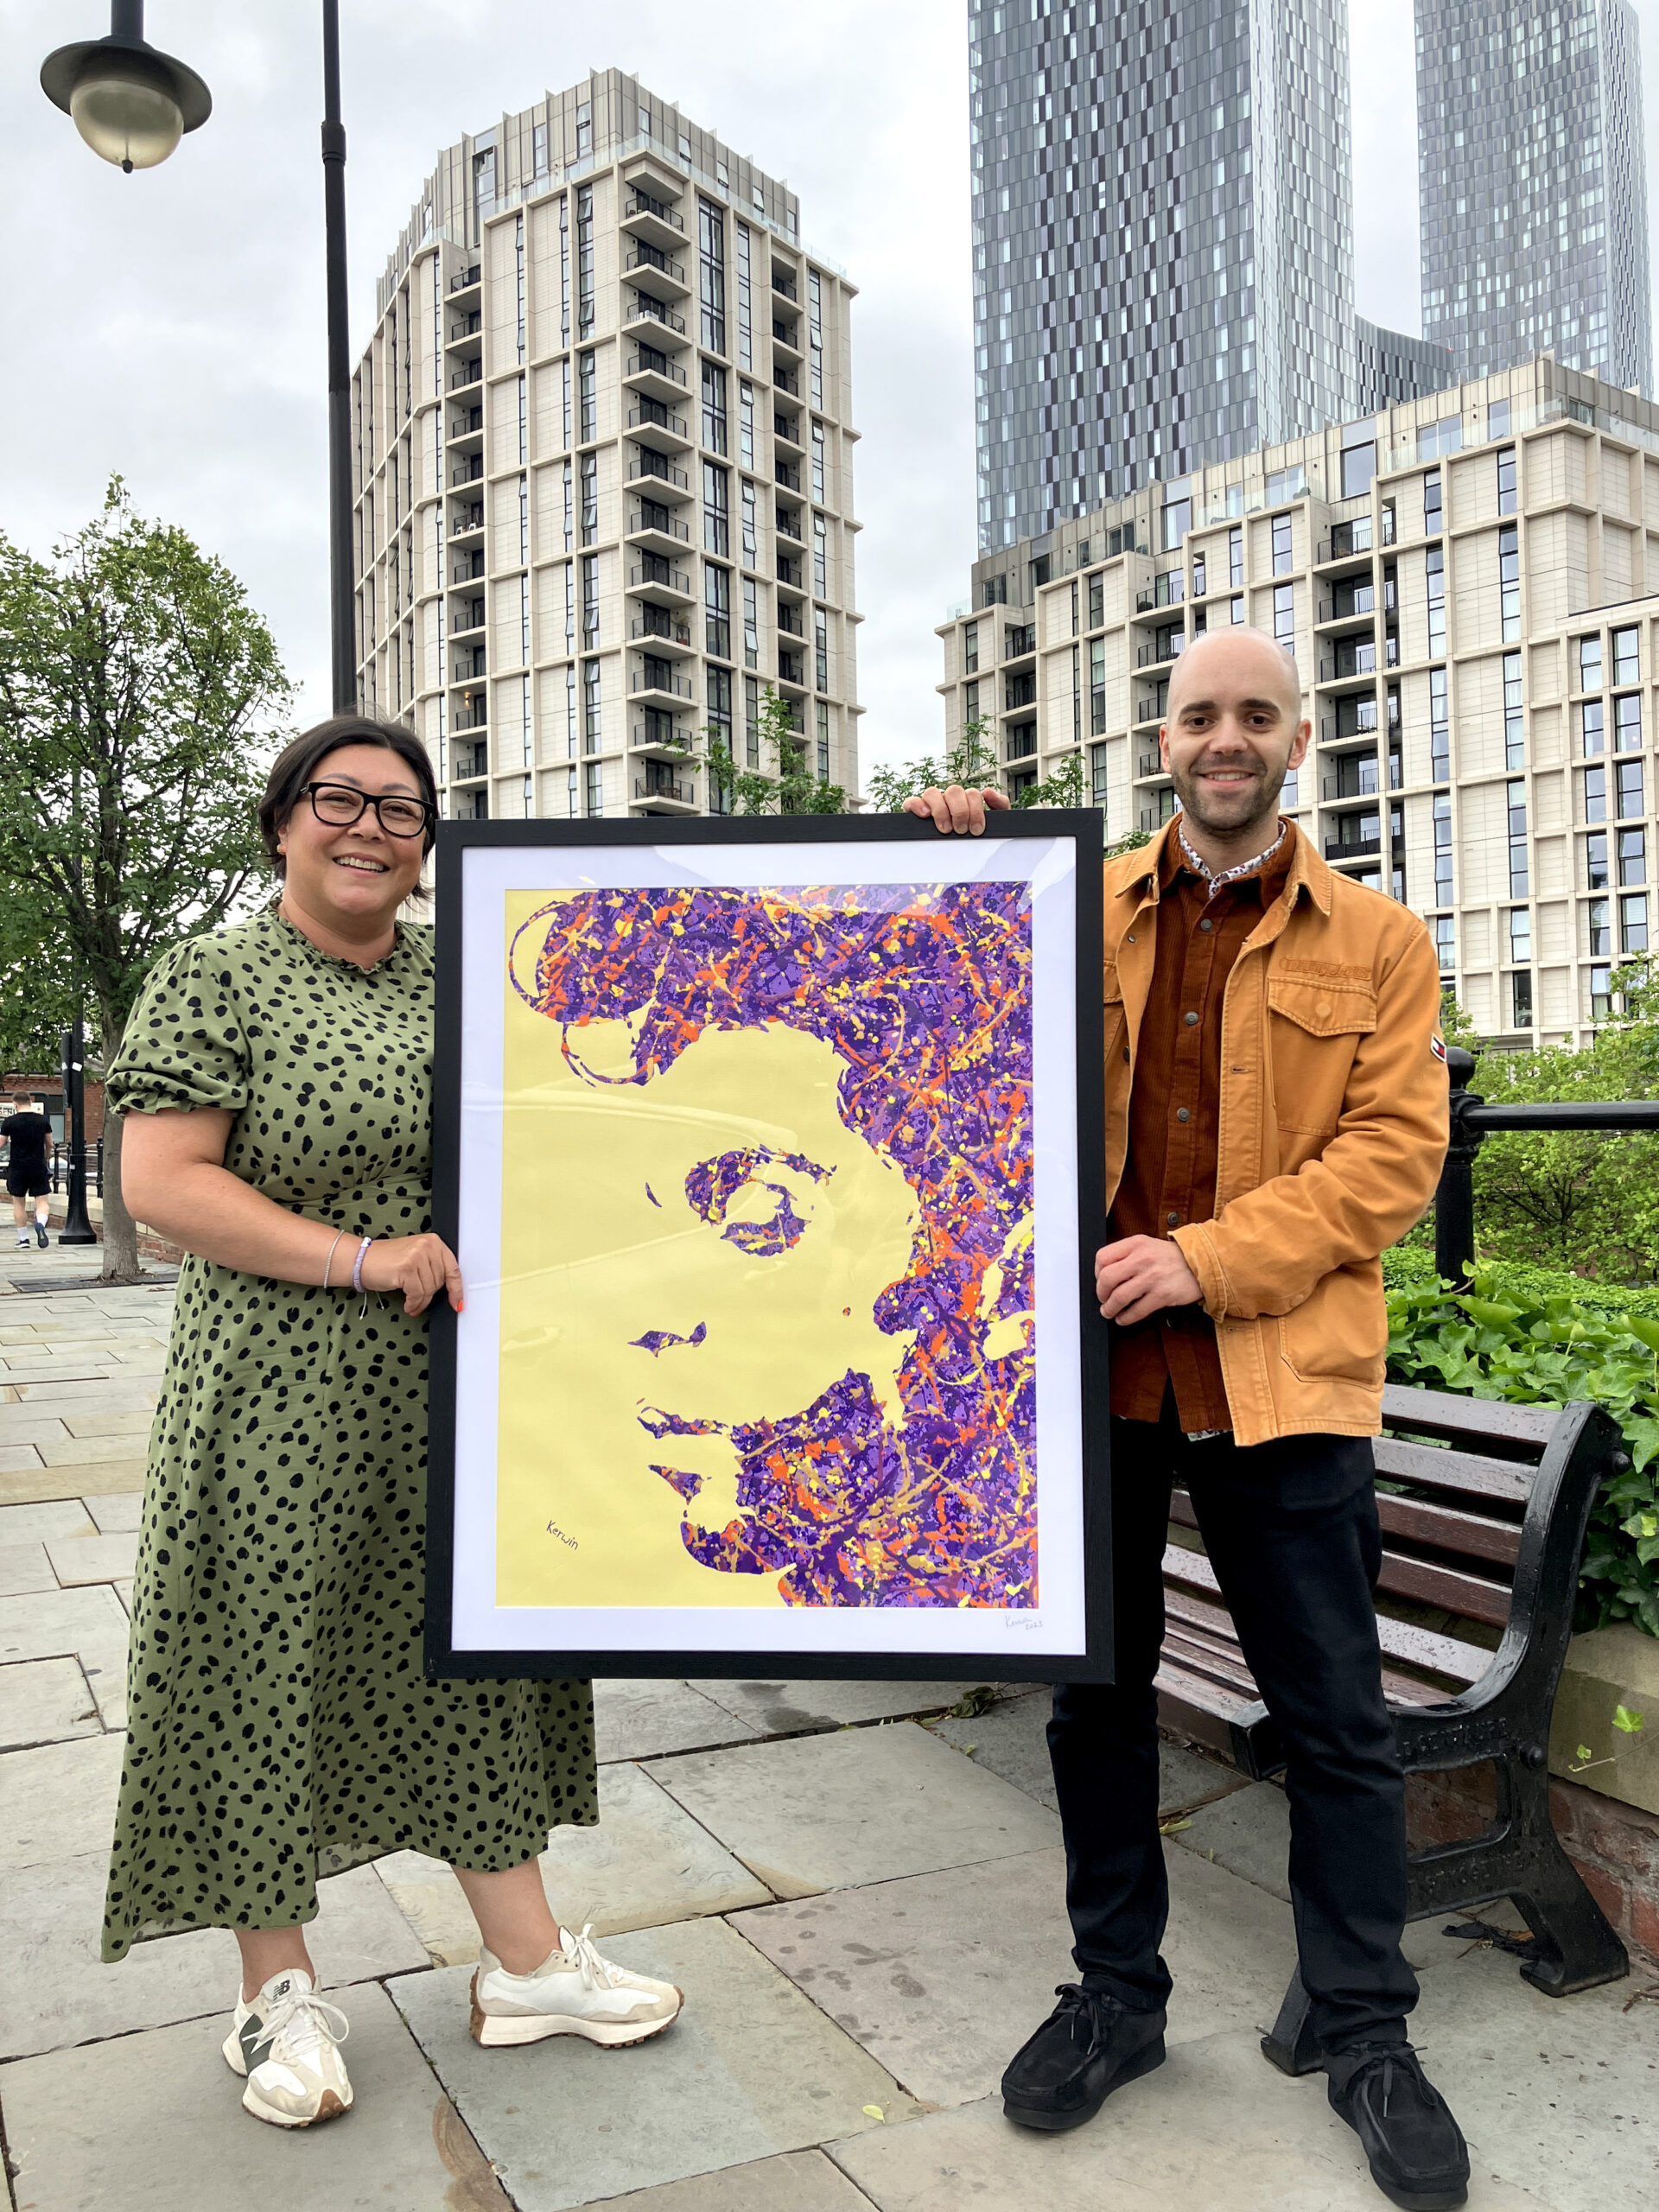 Kerwin Blackburn presenting a hand-embellished Prince print to its new owner in Manchester